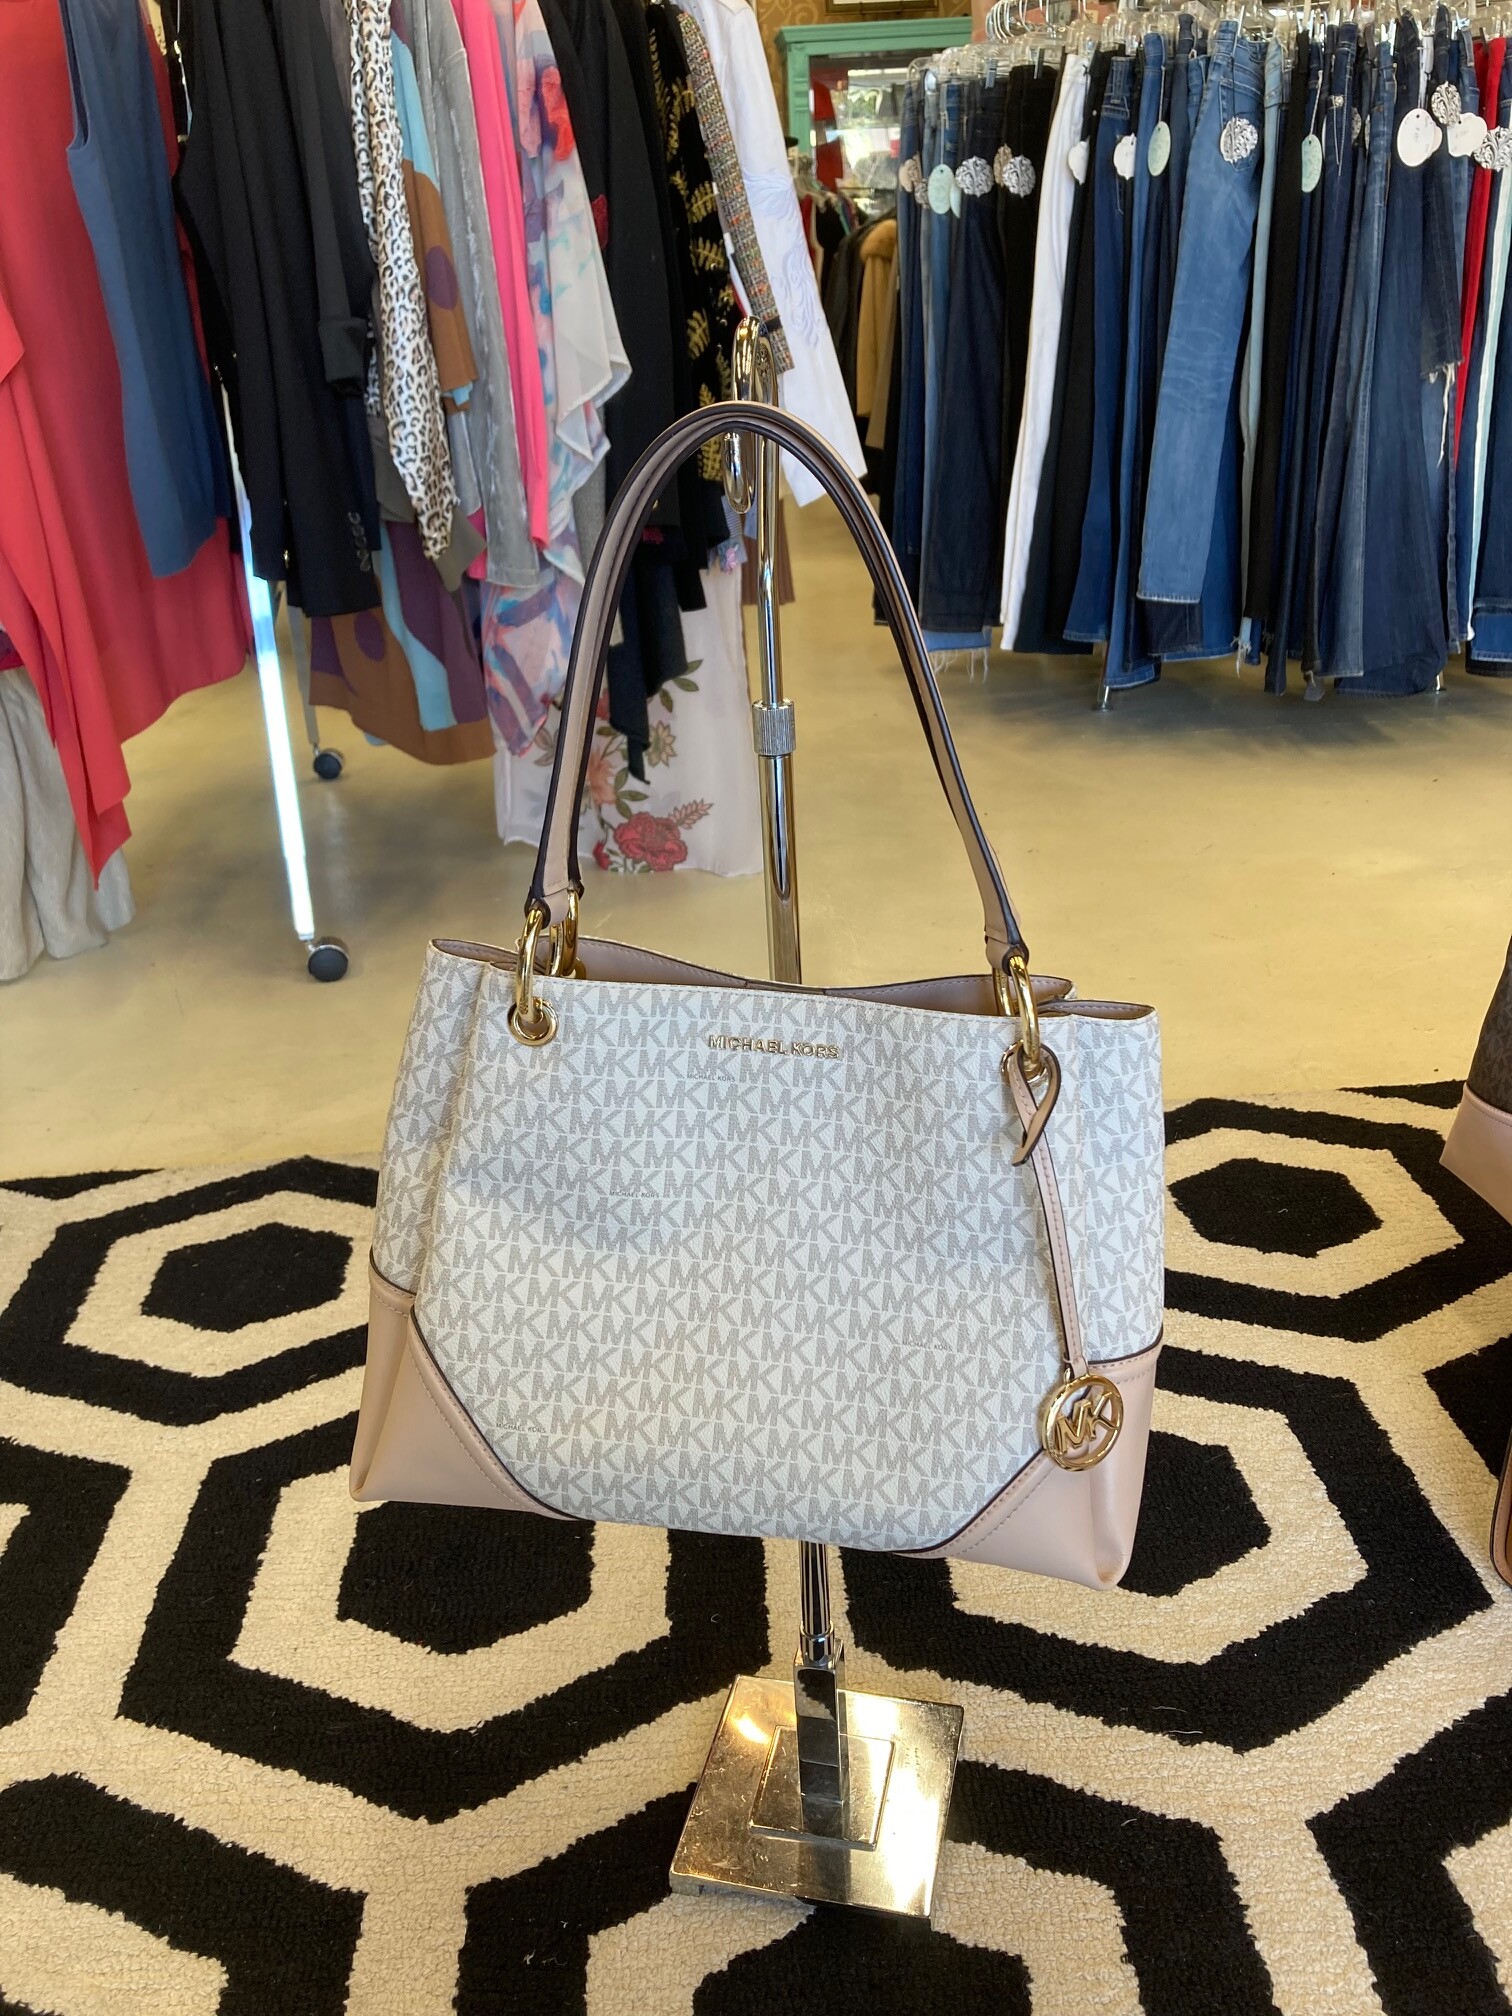 M Kors Bag: Classic style with great detail.  This bag is a must have for spring!